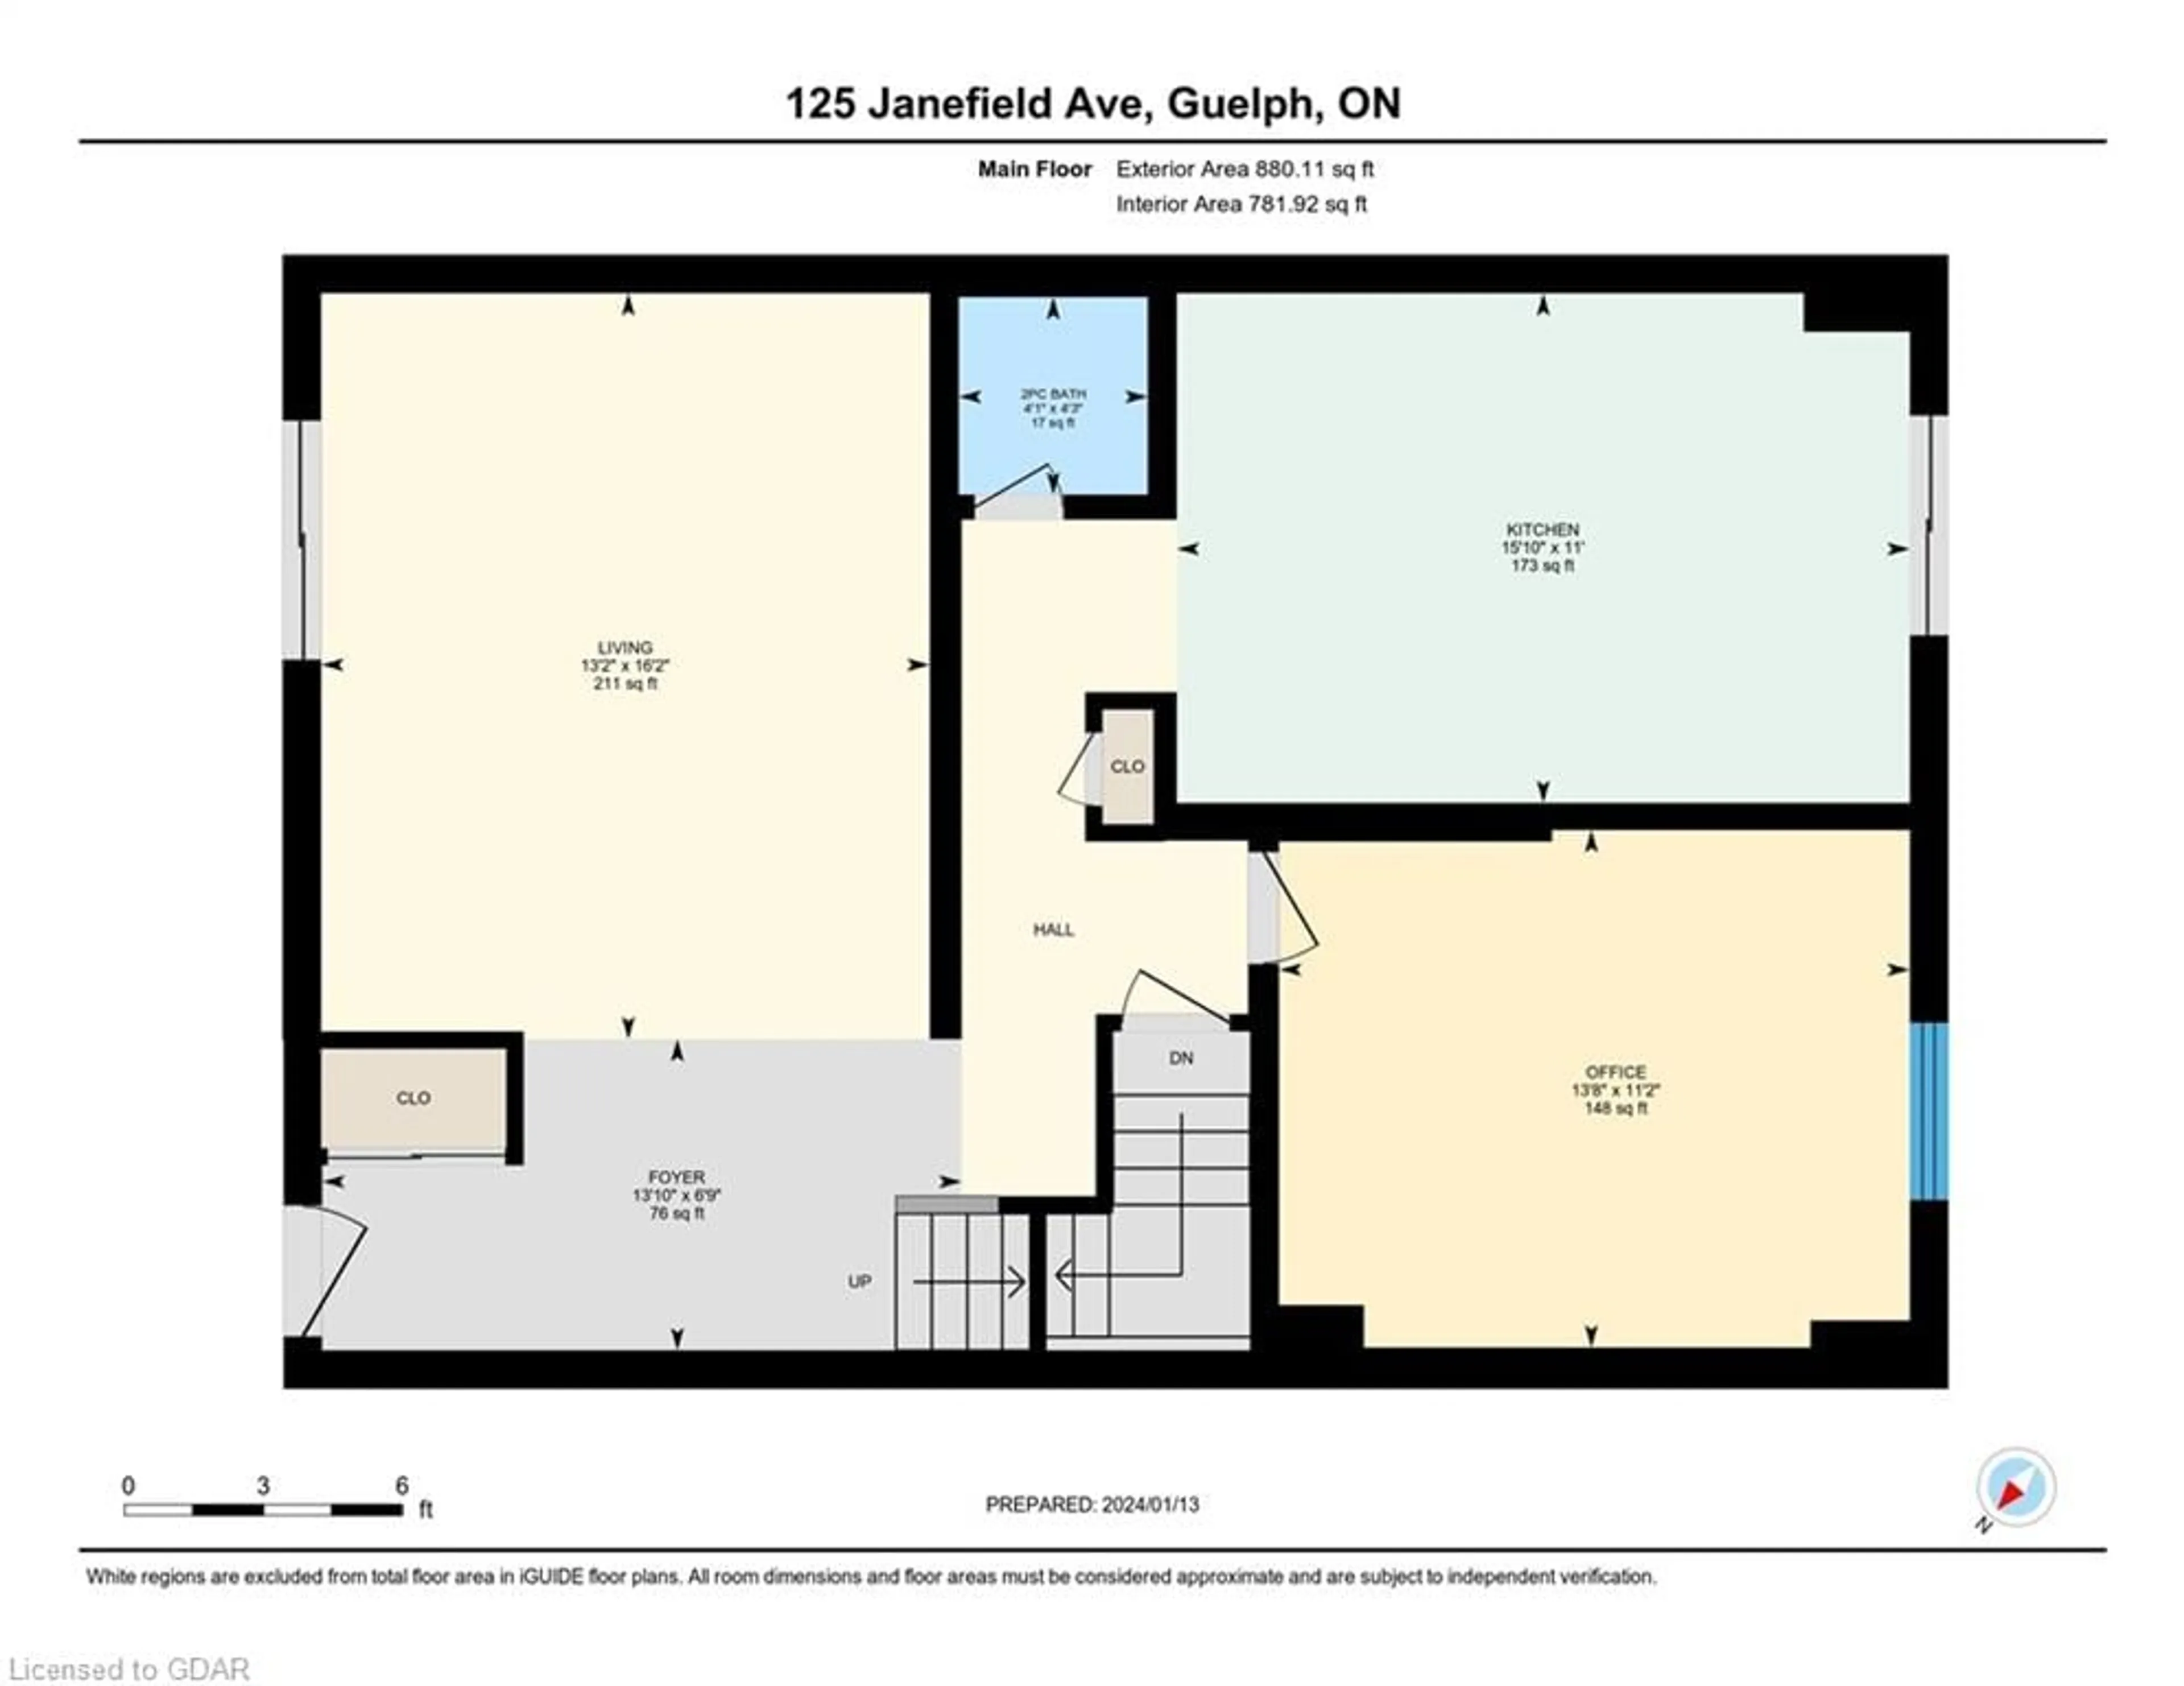 Floor plan for 125 Janefield Ave #7, Guelph Ontario N1G 2L4